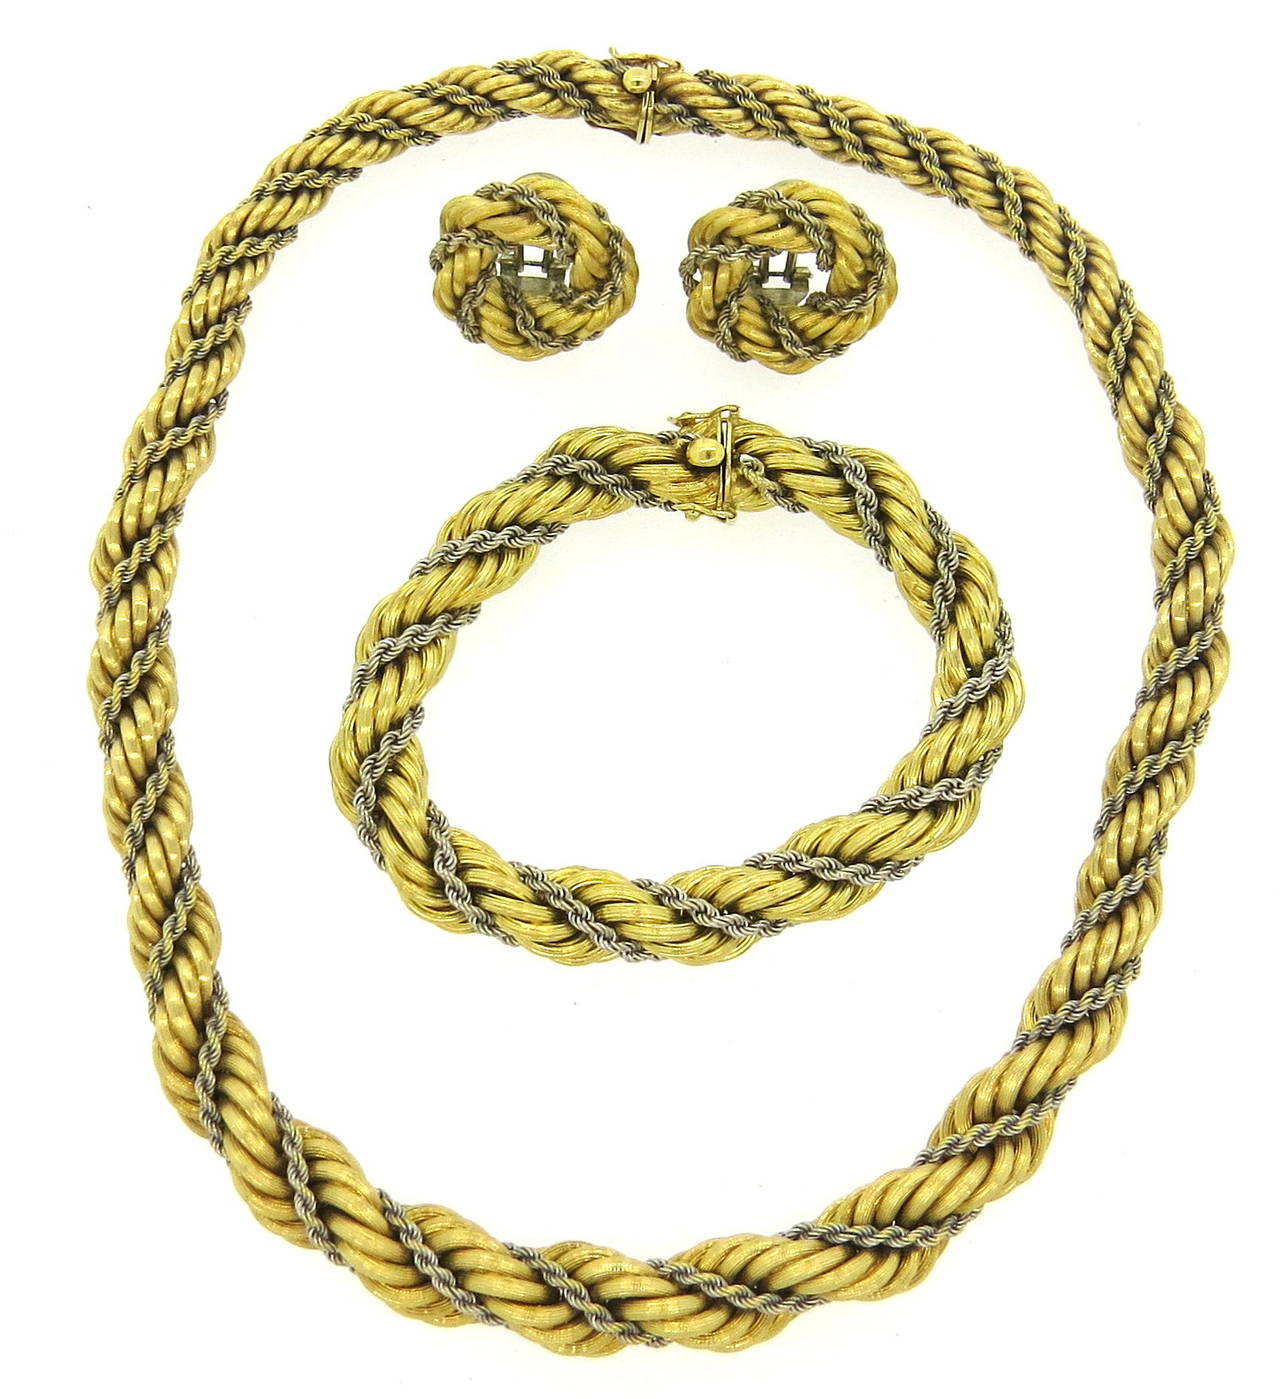 1960s 18k yellow and white gold set, crafted in twisted rope design. Necklace is 17